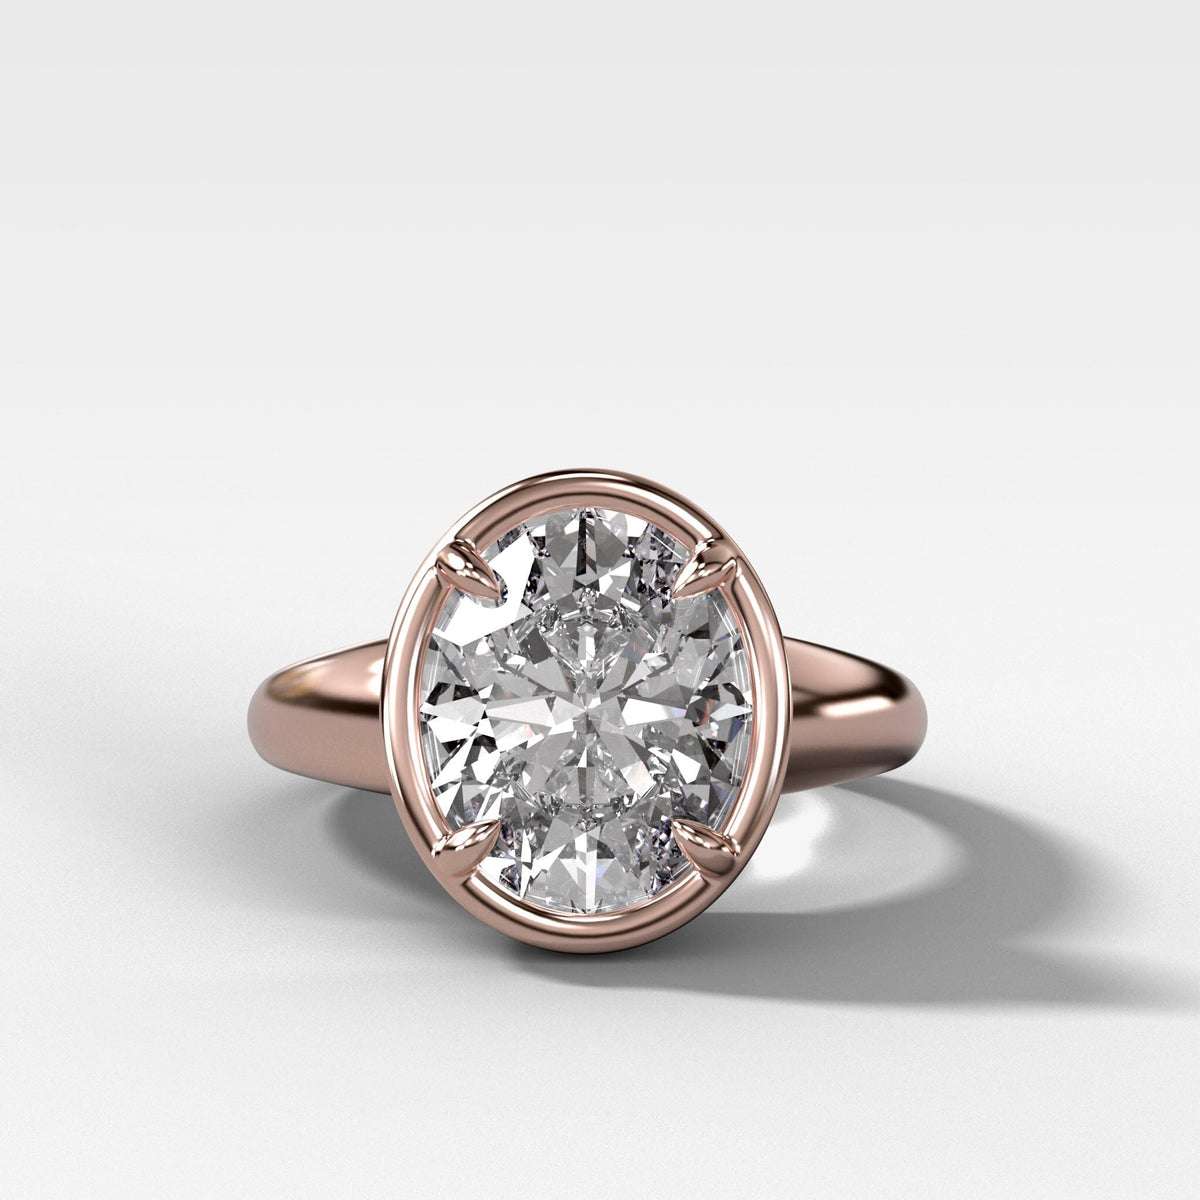 Club Ring Solitaire With an Oval Cut Engagement Good Stone Inc 